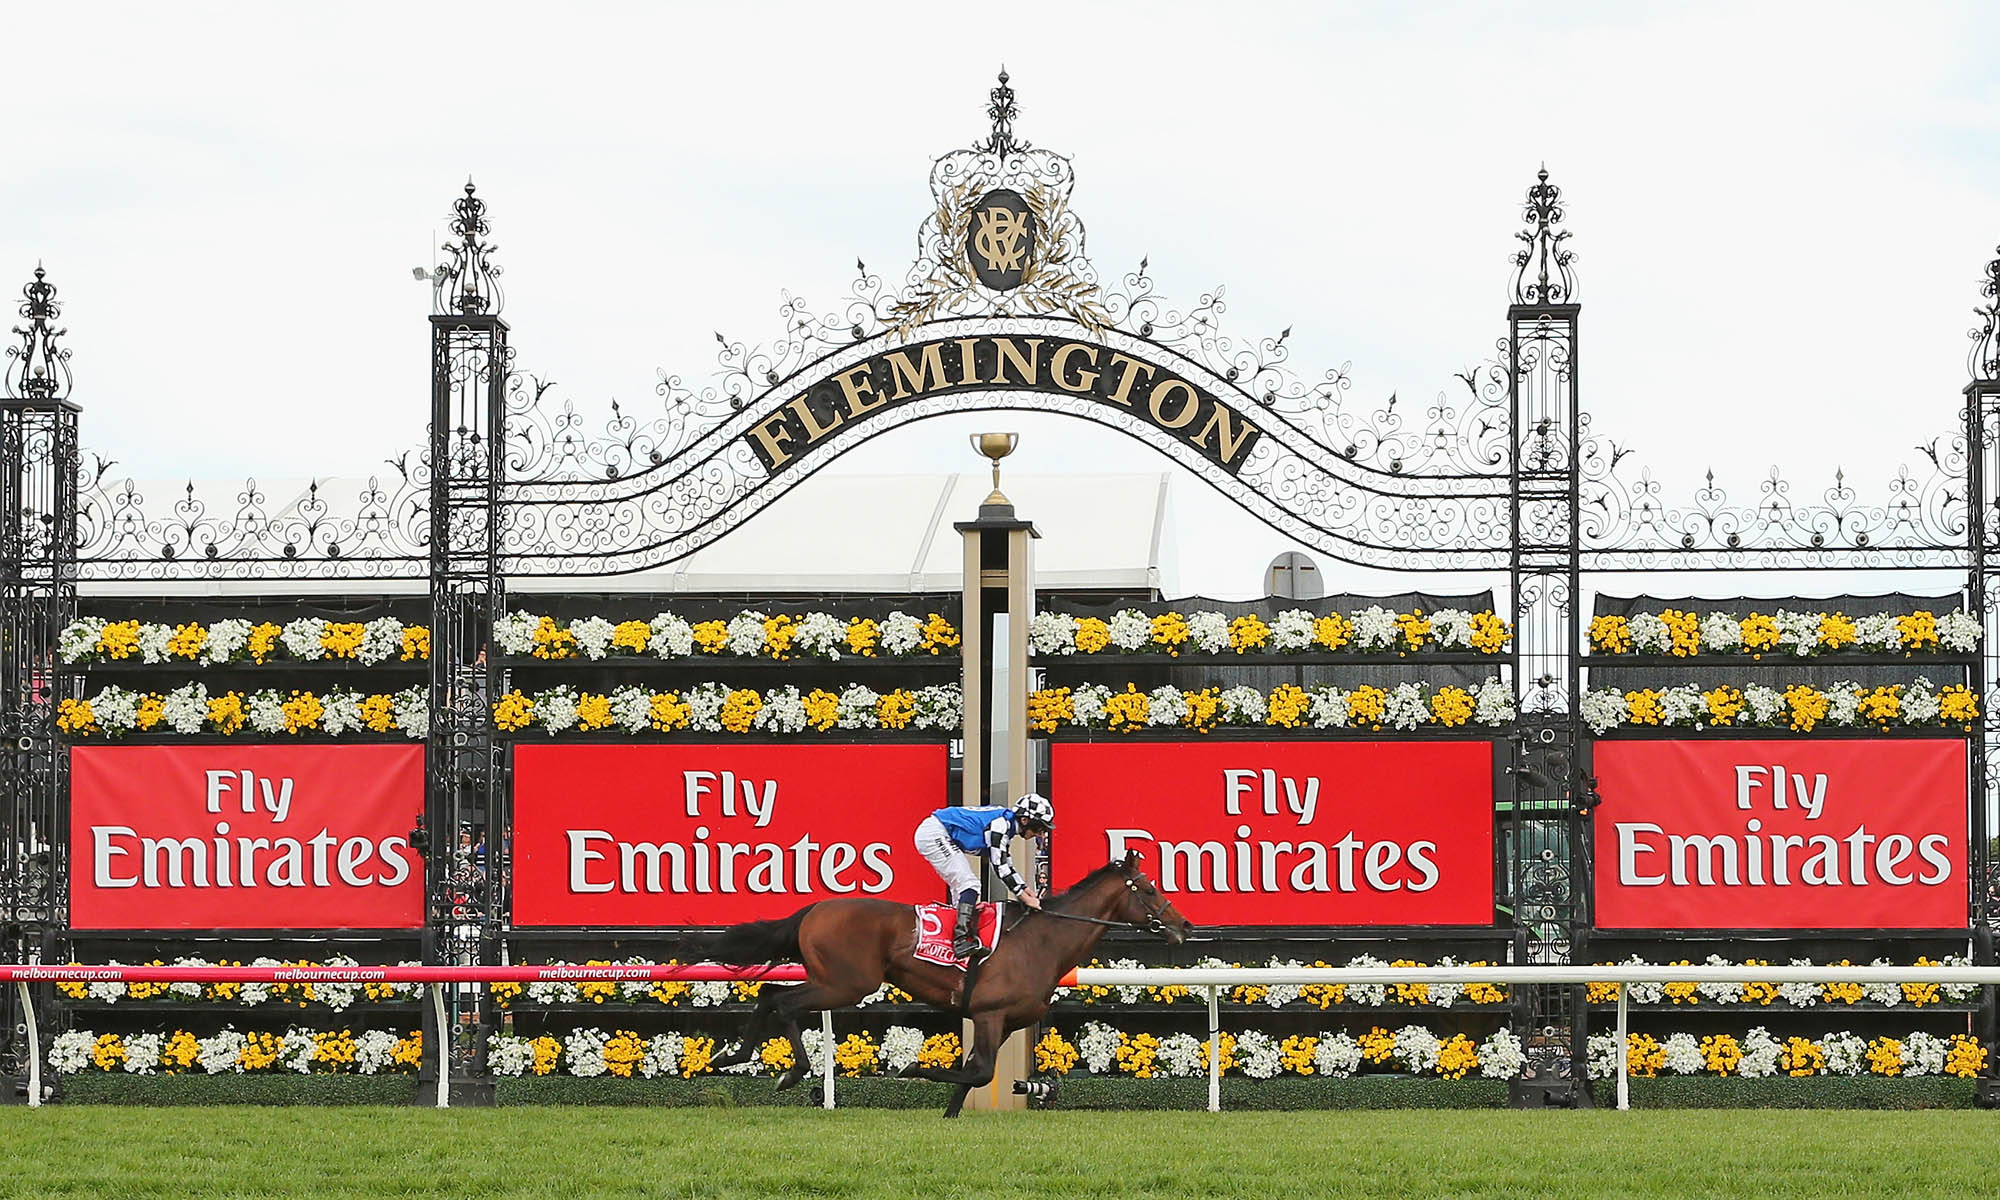 melbourne-chauffeured-spring-carnival-racing/